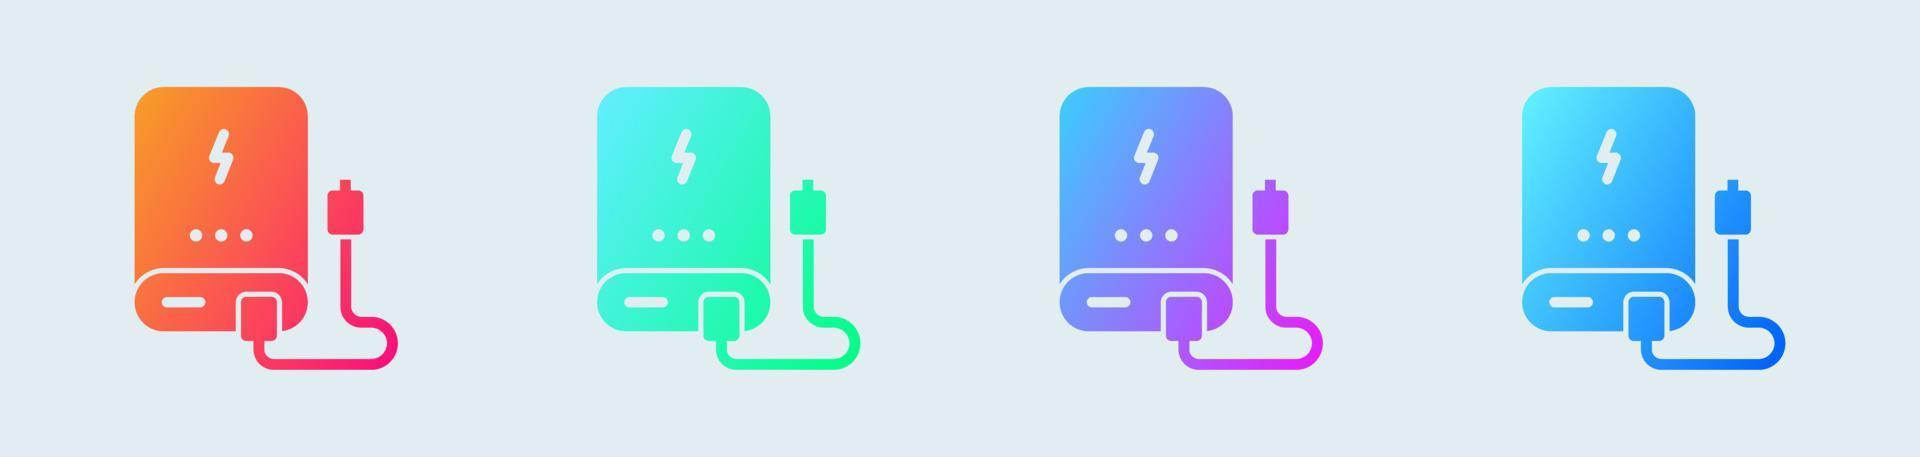 Powerbank solid icon in gradient colors. Power supply signs vector illustration.